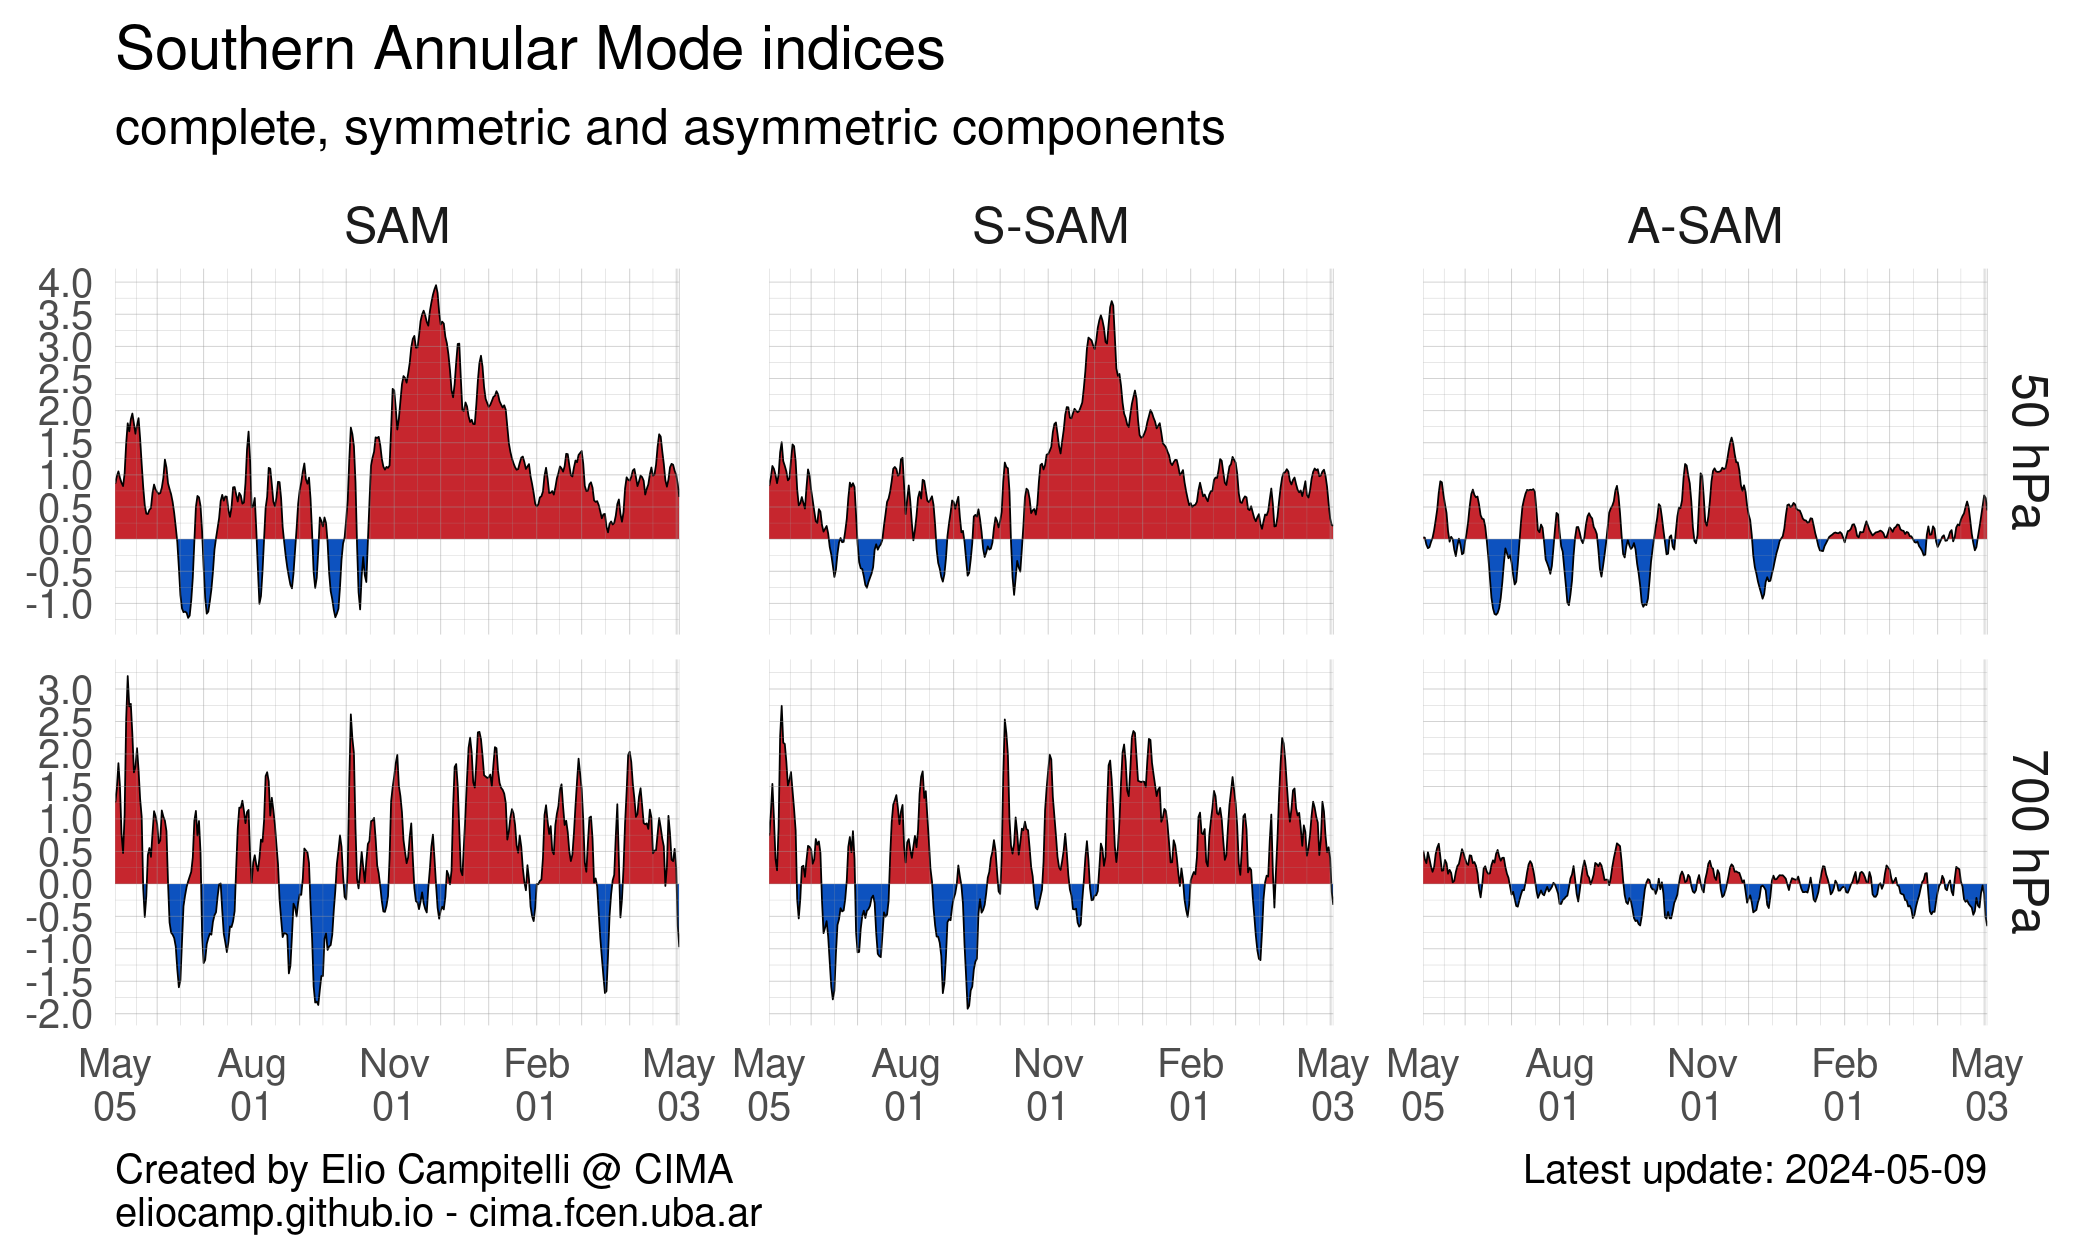 Timeseries of the SAM, S-SAM and A-SAM indices for the last 12 months for the 50 and 700 hPa level.